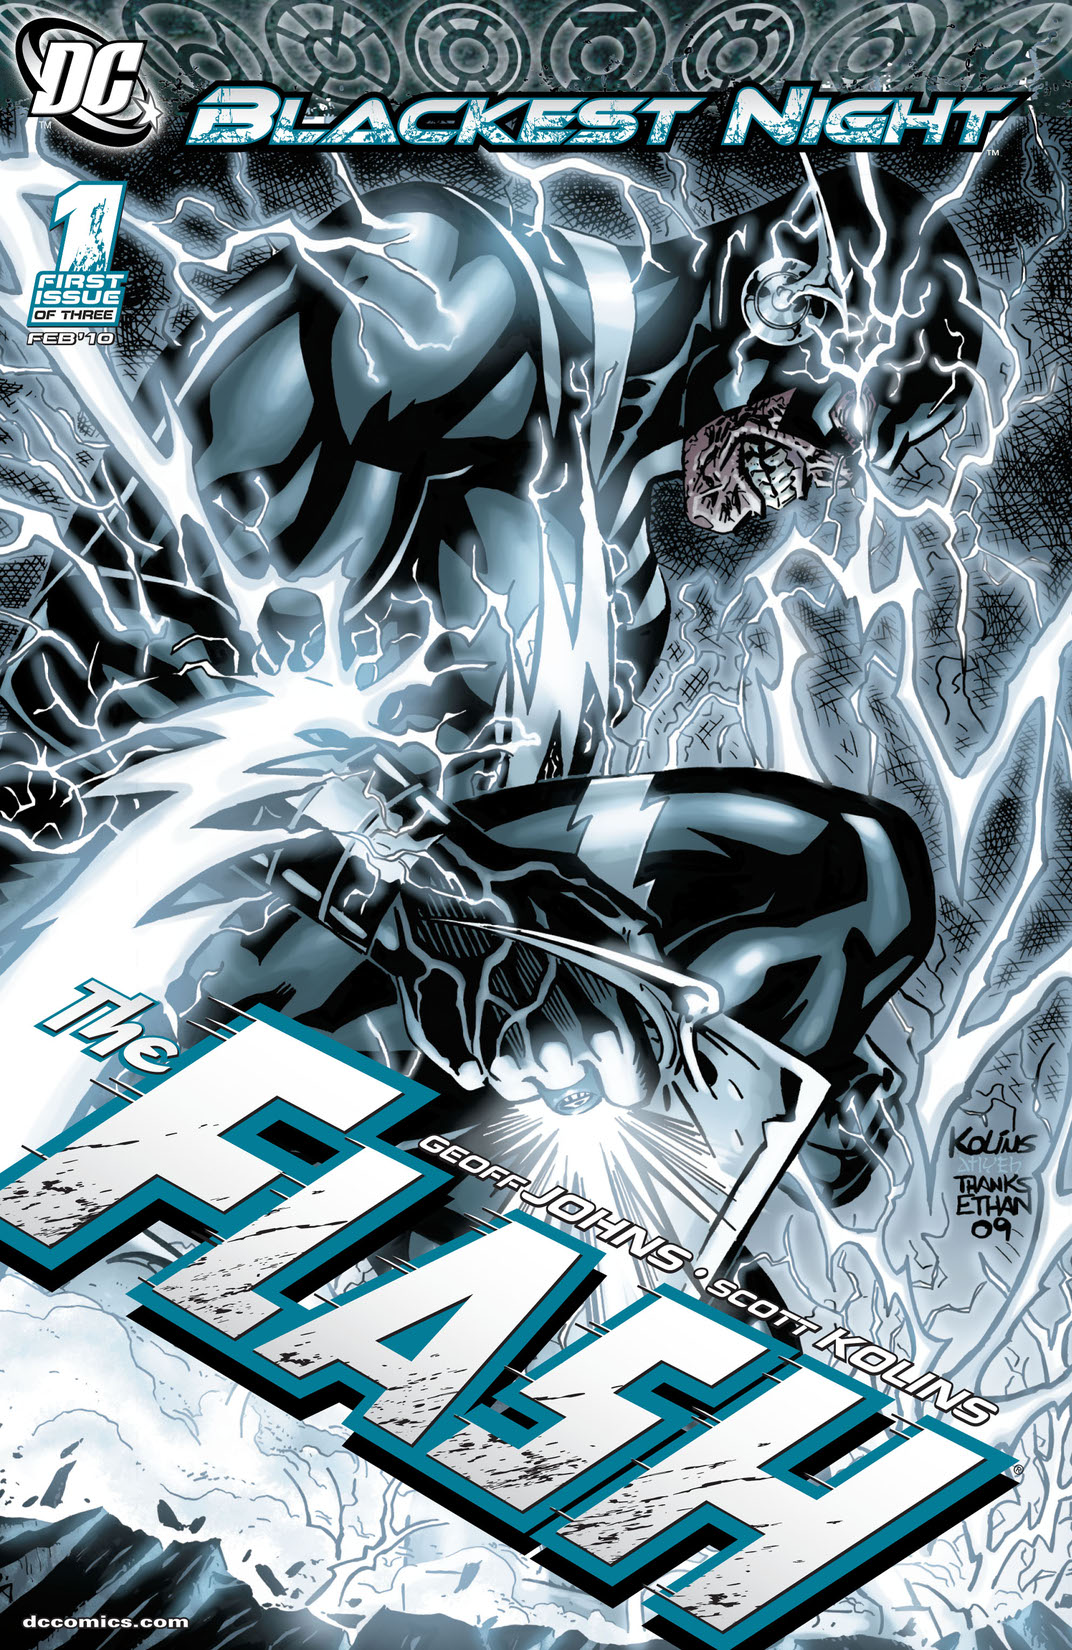 Blackest Night: The Flash #1 preview images